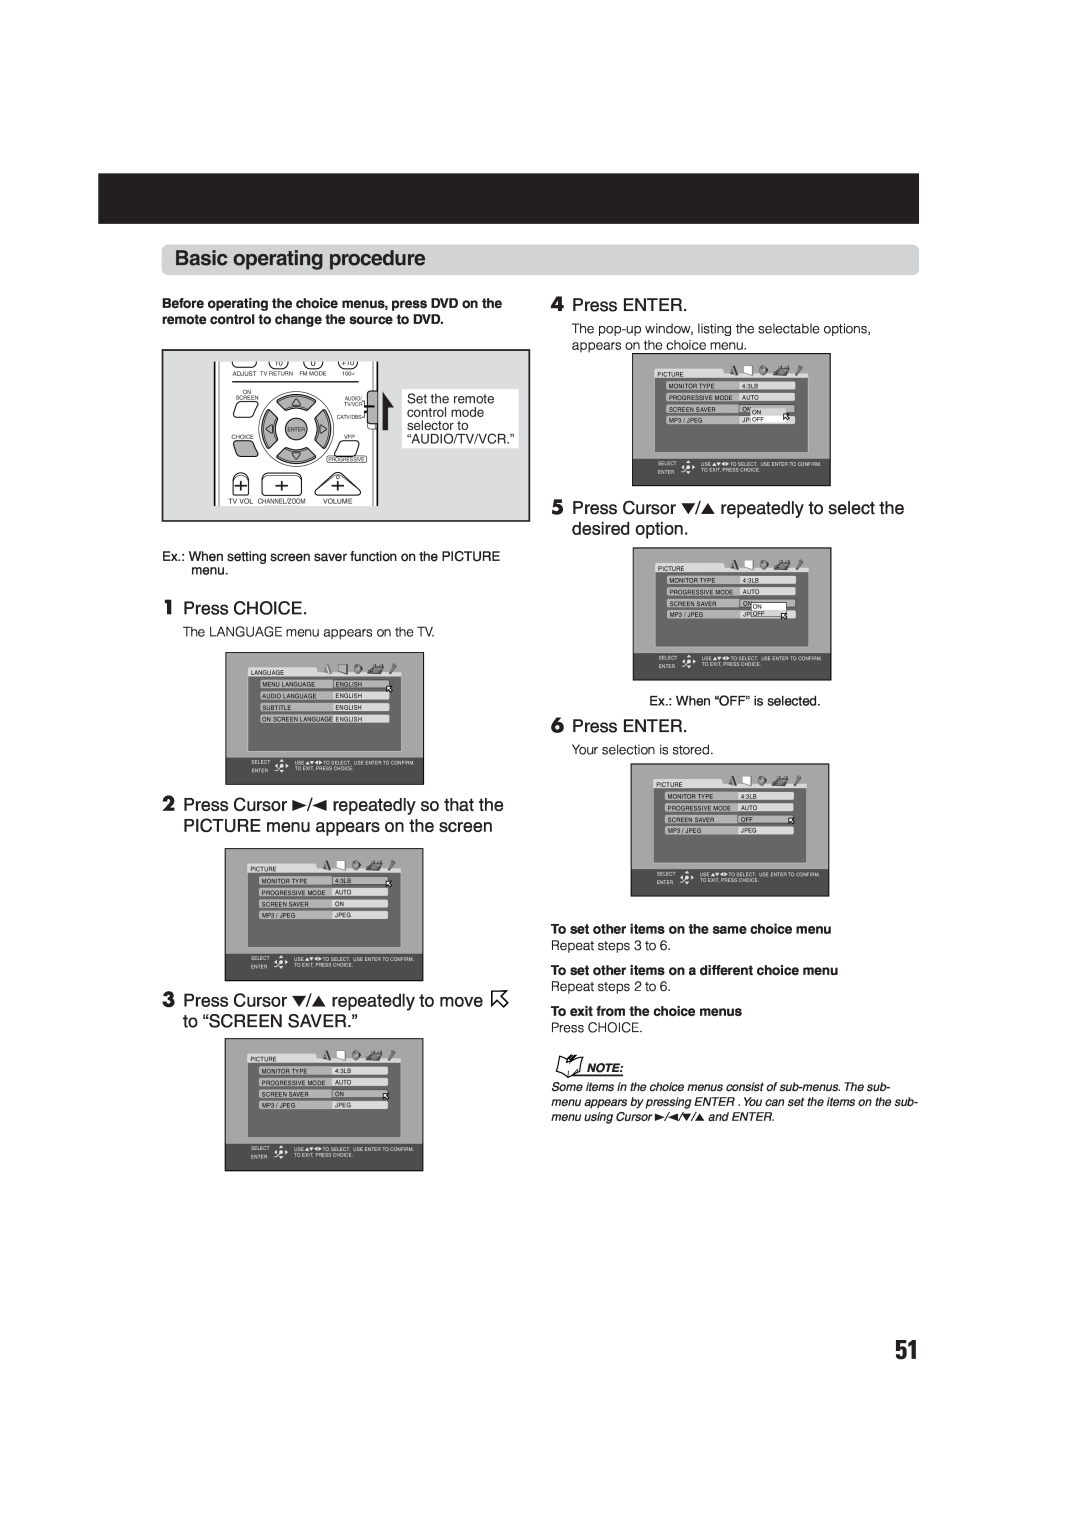 JVC TH-A75 manual Basic operating procedure, 1Press CHOICE, 6Press ENTER, 4Press ENTER, To exit from the choice menus 